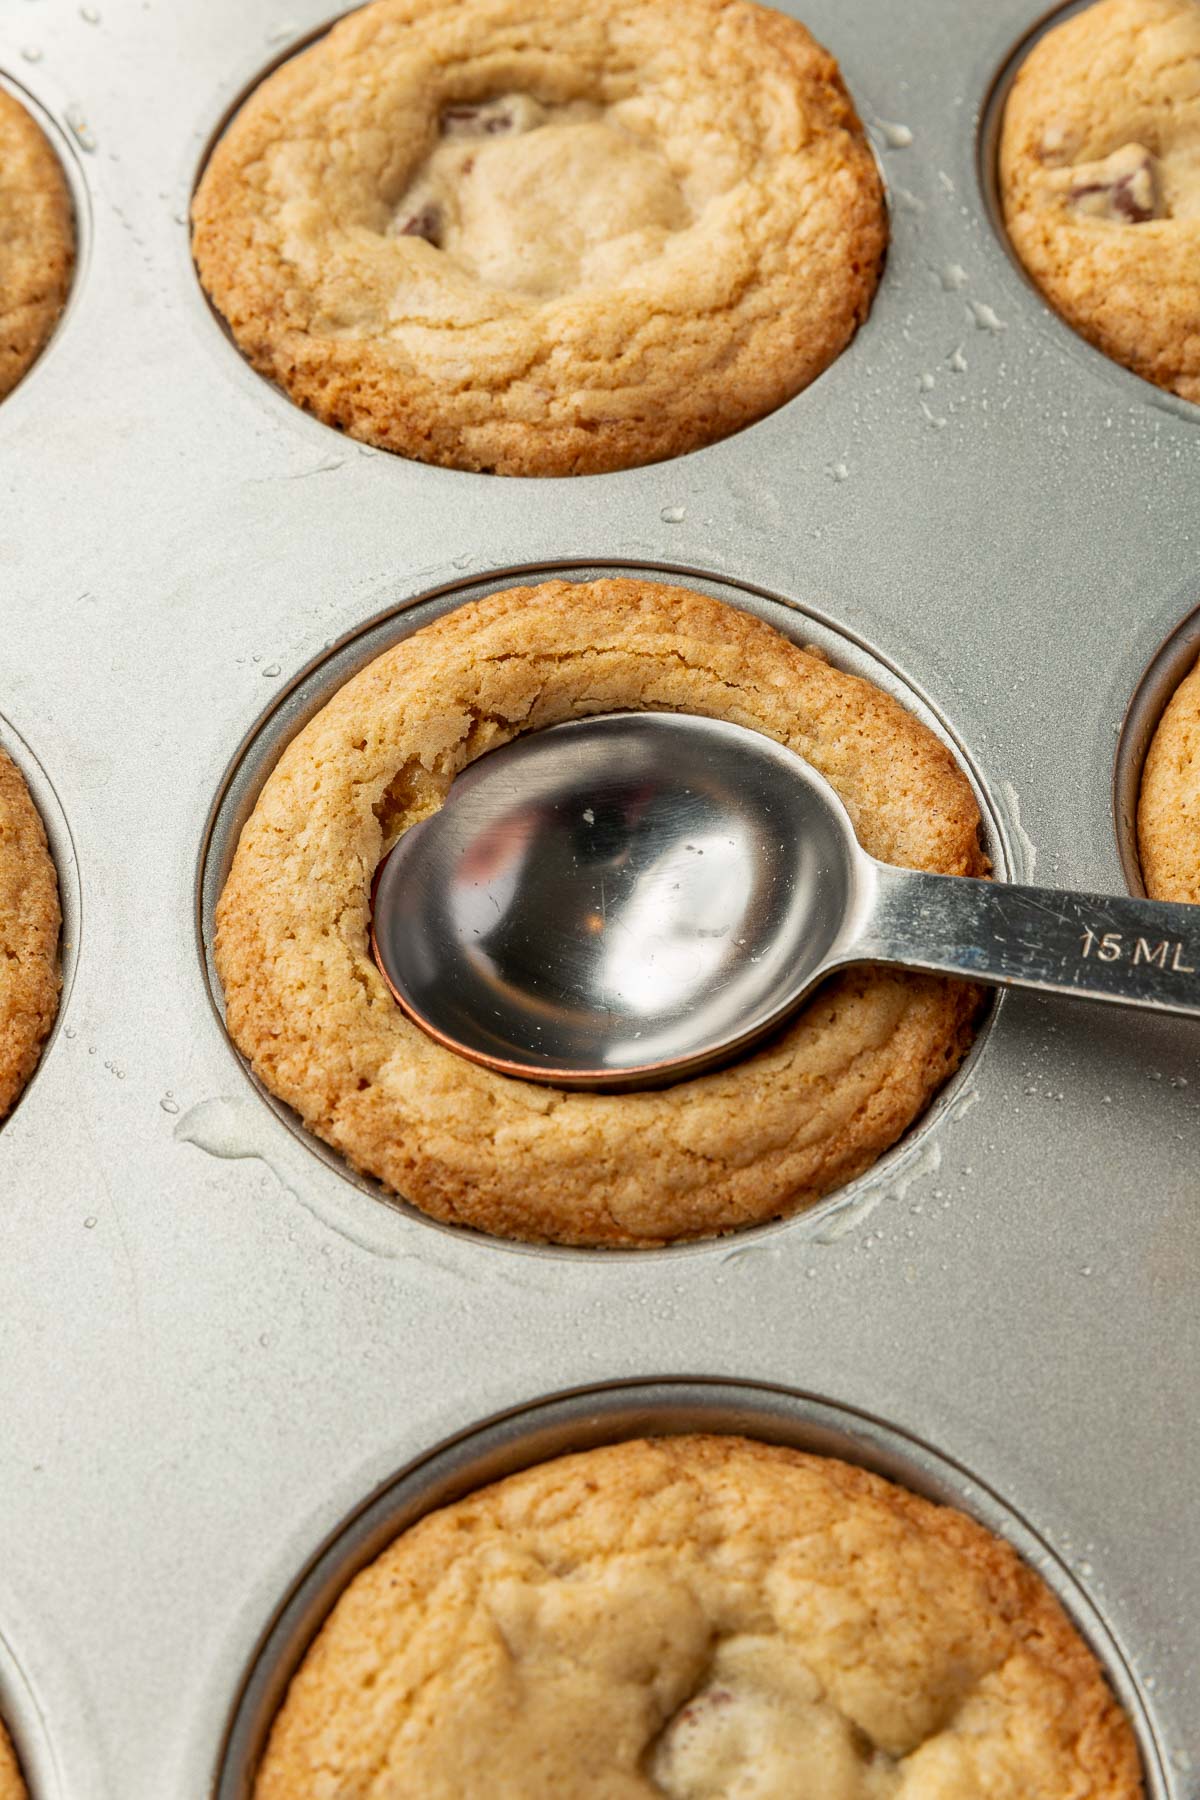 A tablespoon-sized measuring spoon pressing down in a chocolate chip cookie cup in a muffin tin to make an indentation after baking in the oven.